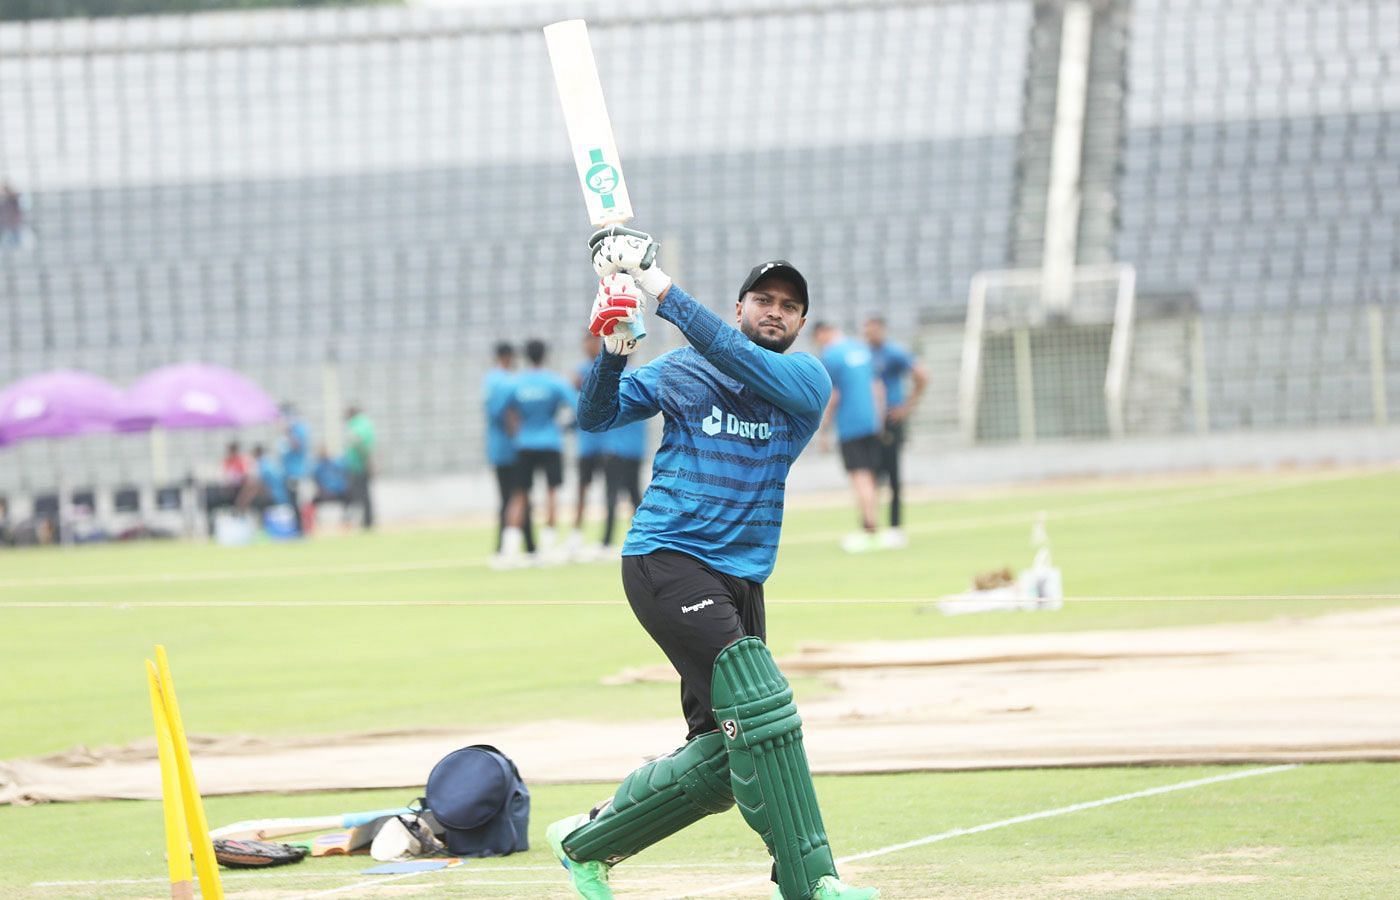 Shakib Al Hasan will be the player to watch out for (Image: Twitter/BCB)